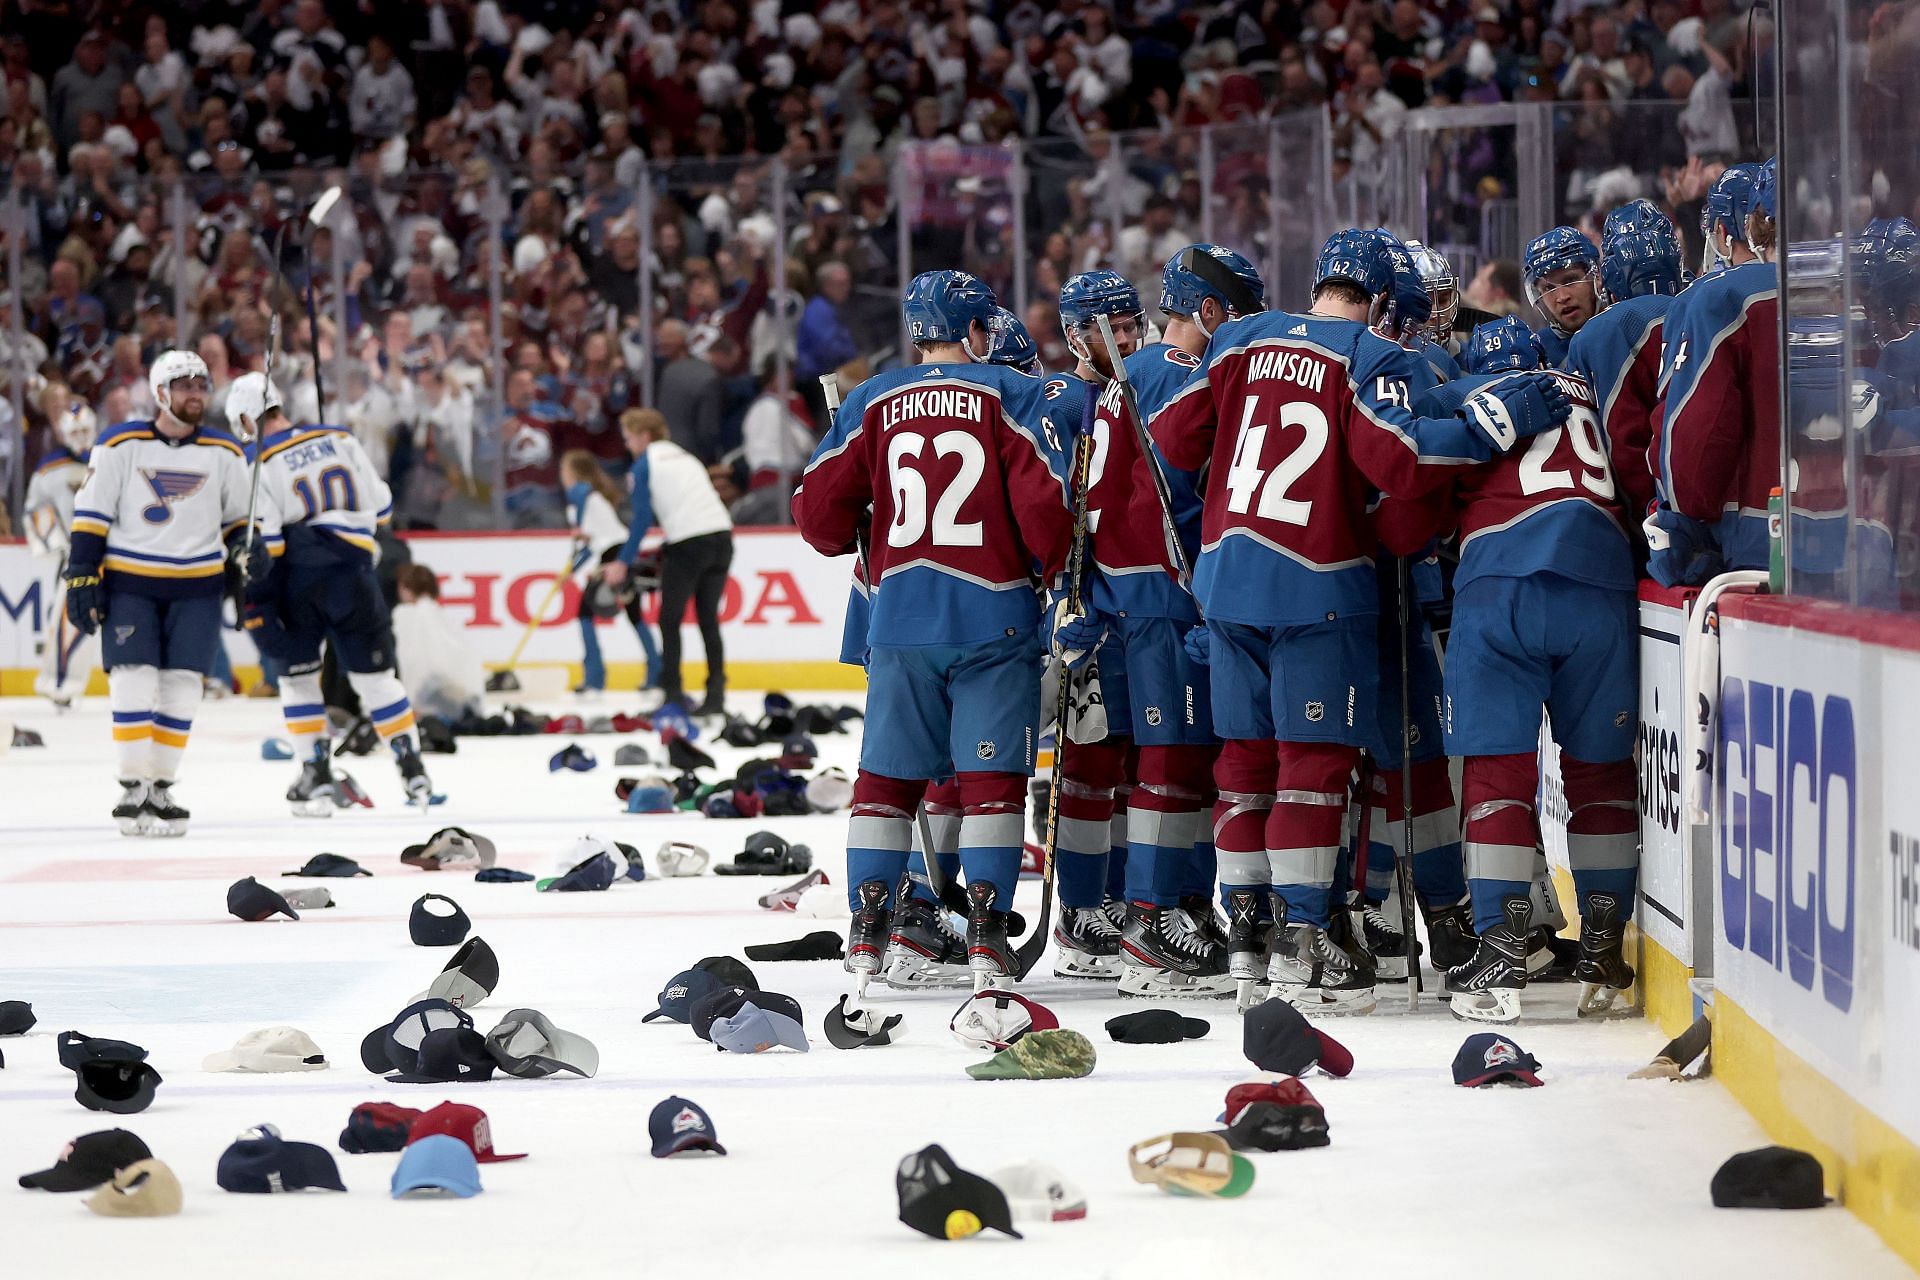 Nathan MacKinnon notched his first career playoff hat trick in Game 5.